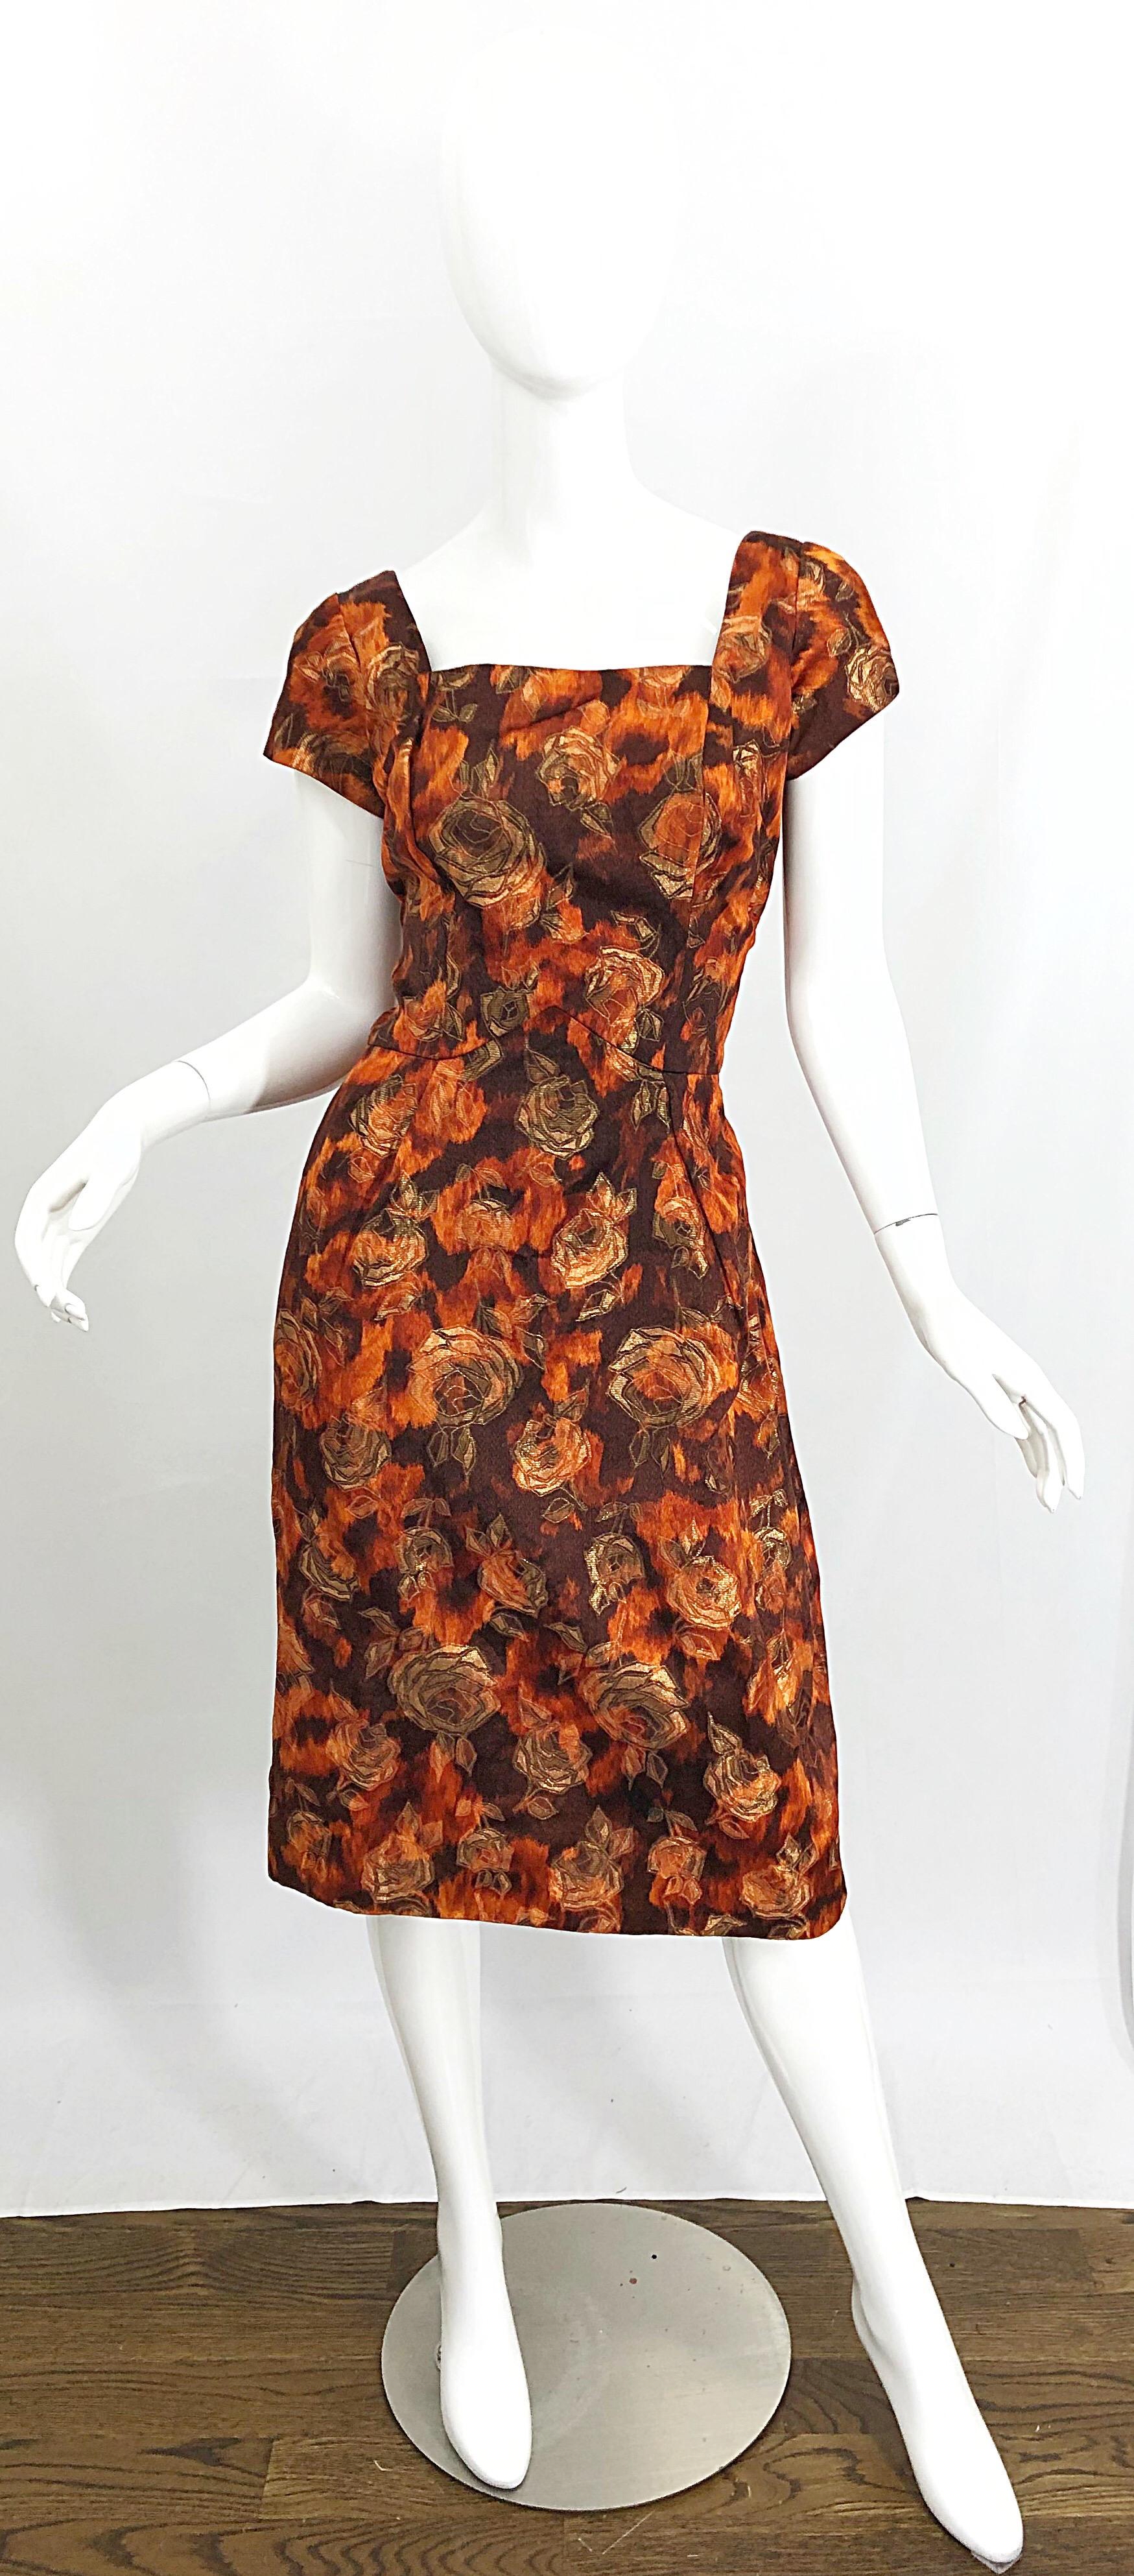 Chic 1950s demi couture rose print silk brocade dress AND jacket ensemble! Features a beautiful fabric with autumnal colors of brown, burnt orange and gold throughout. Pillbox jacket has 3/4 length sleeves, with buttons and snap closures. Short